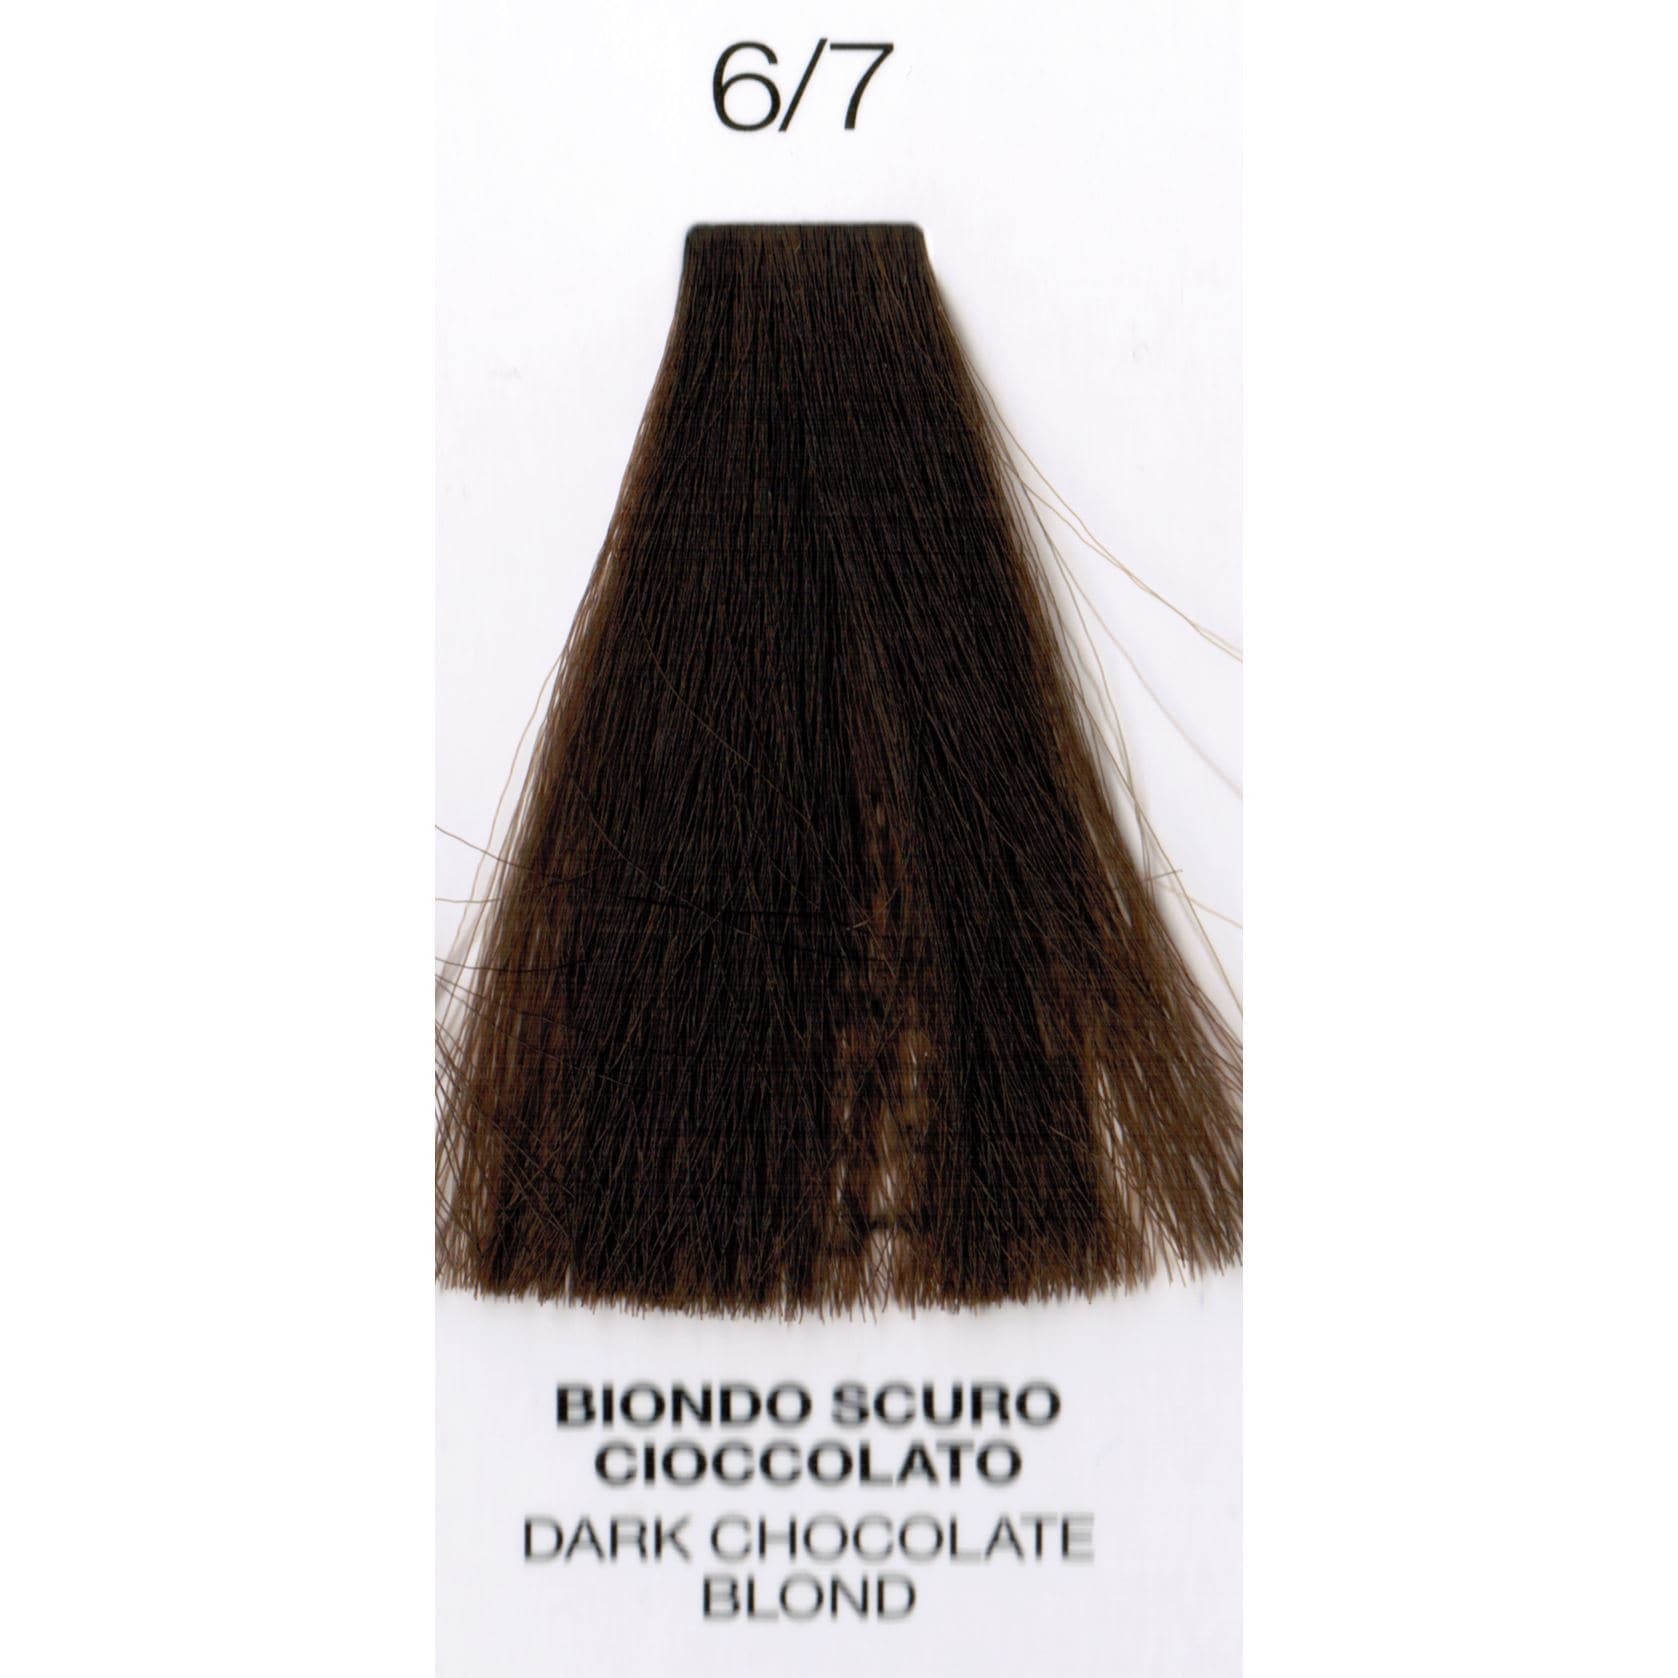 6/7 Dark Cocoa Blonde | Purity | Ammonia-Free Permanent Hair Color HAIR COLOR OYSTER 